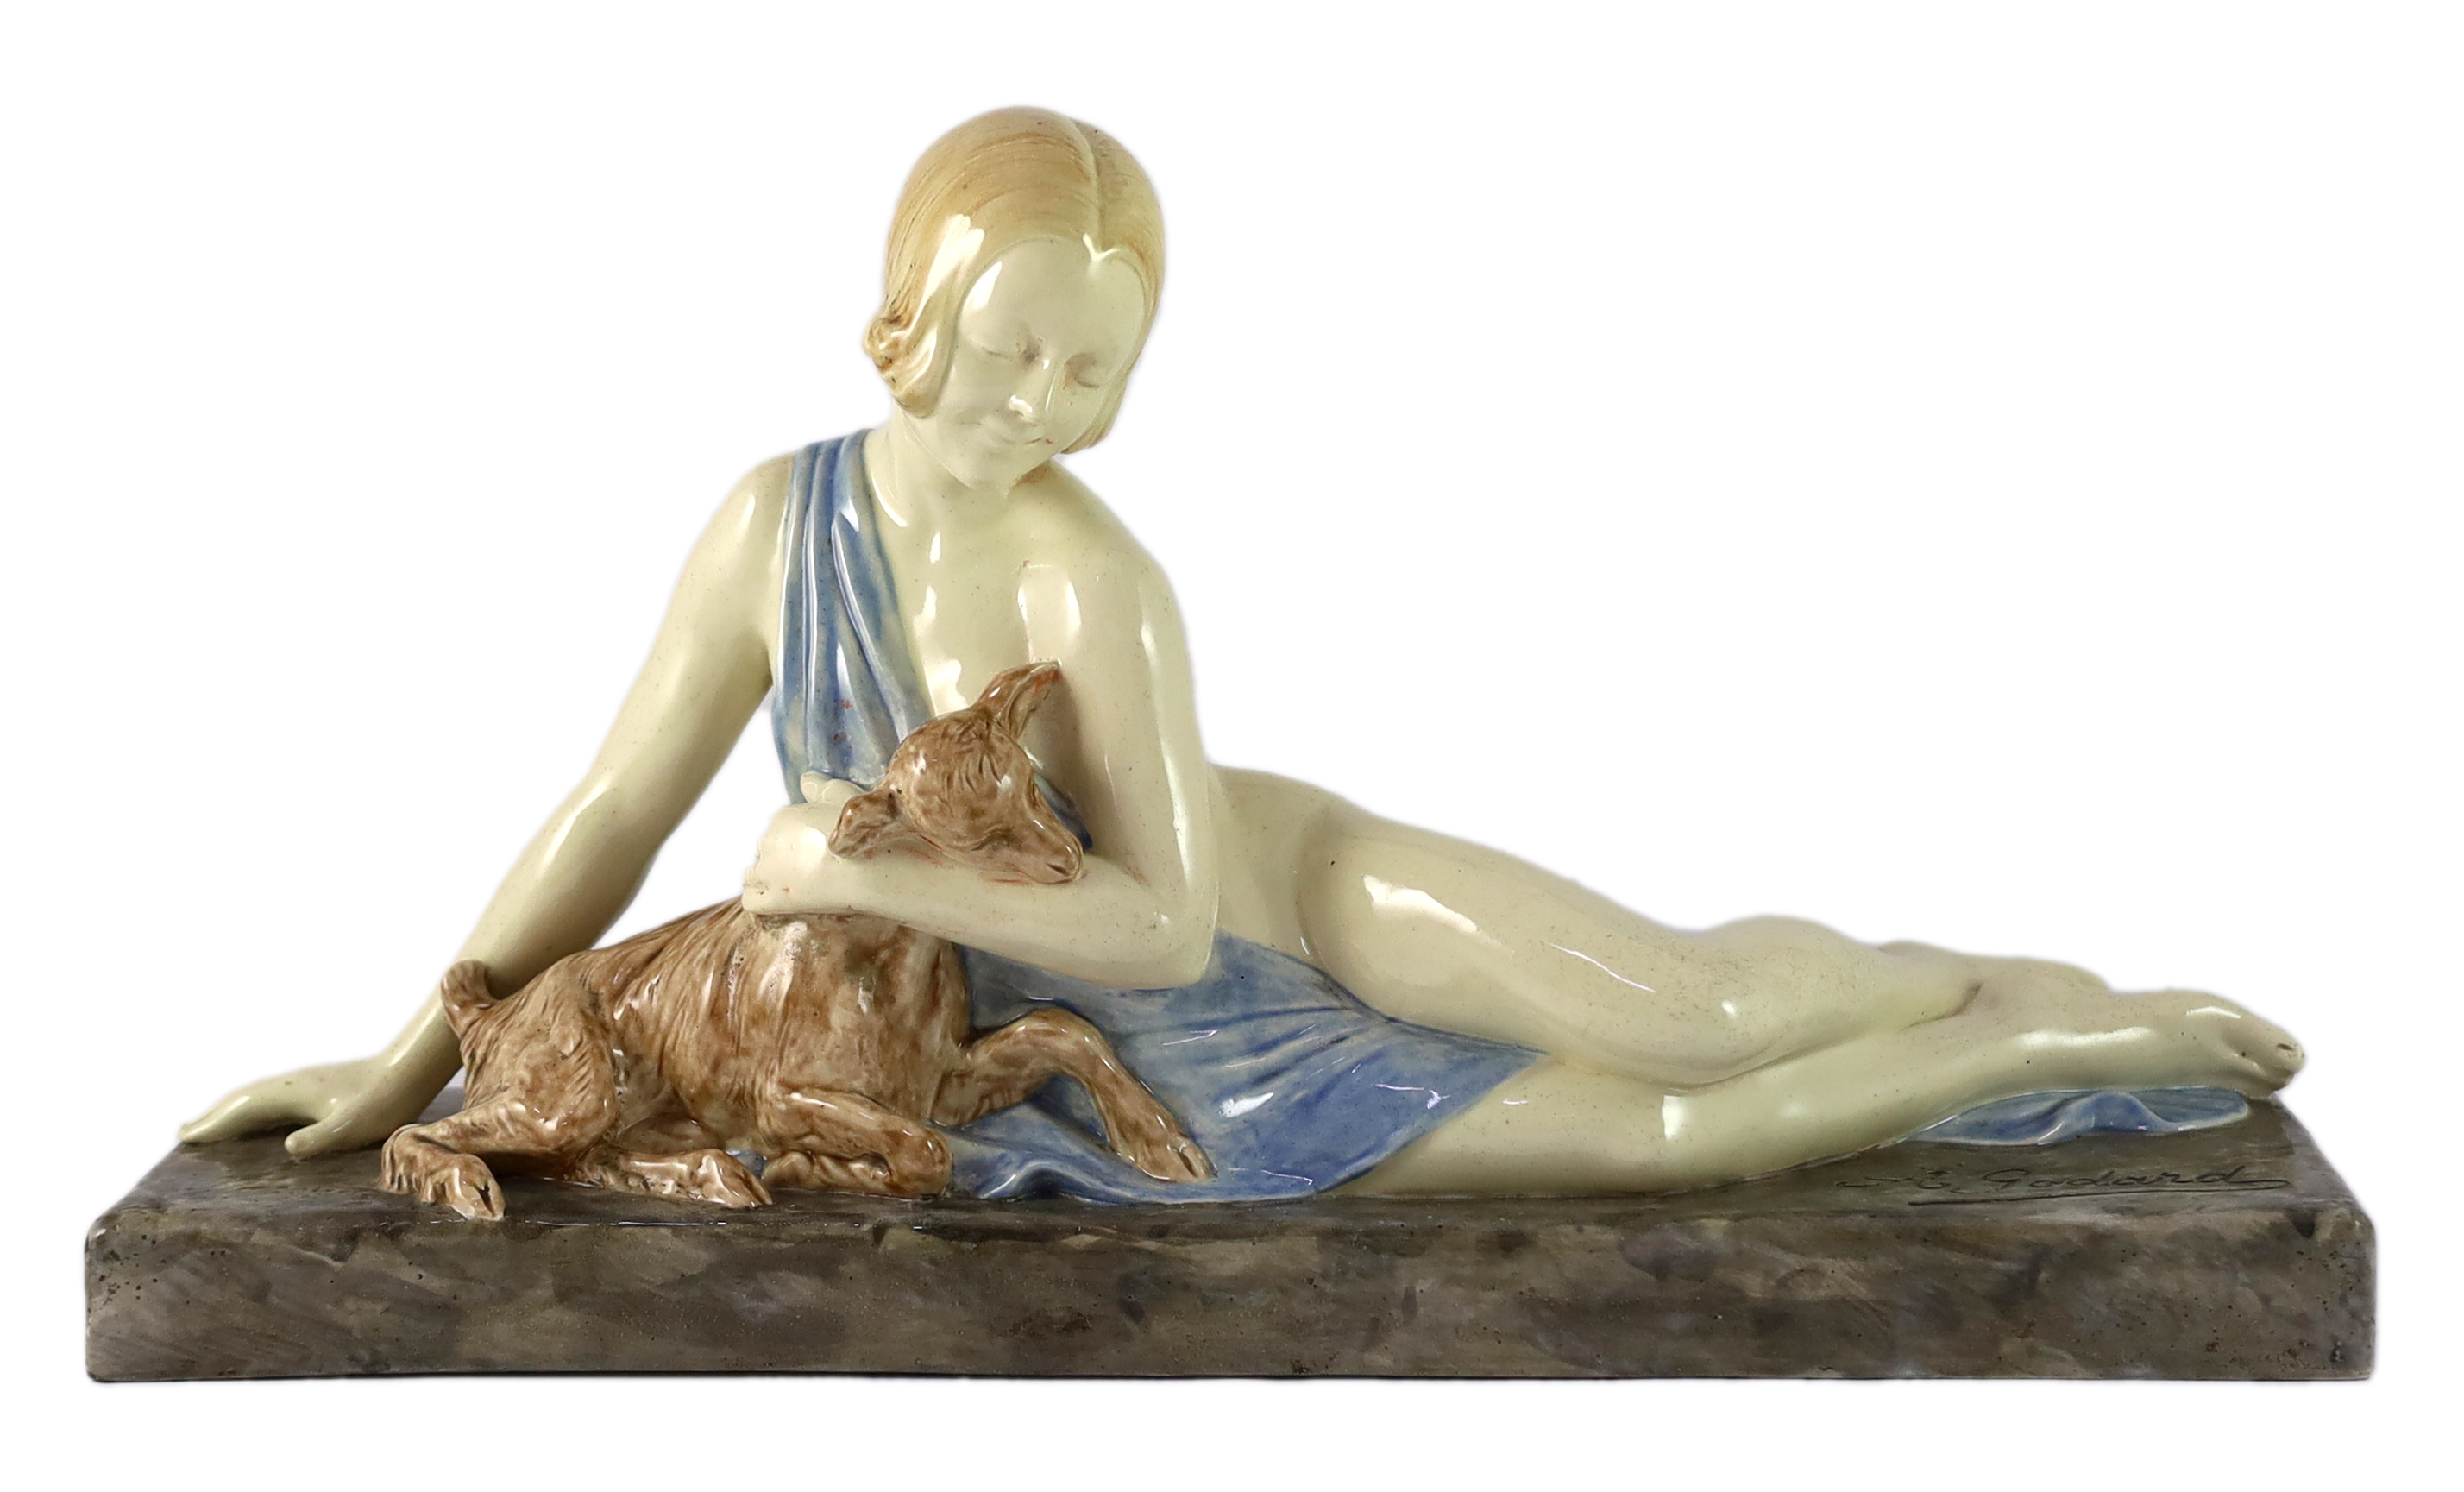 Armand Godard (French, 1824-1887). An Art Deco ceramic group of a reclining beauty with a kid                                                                                                                               